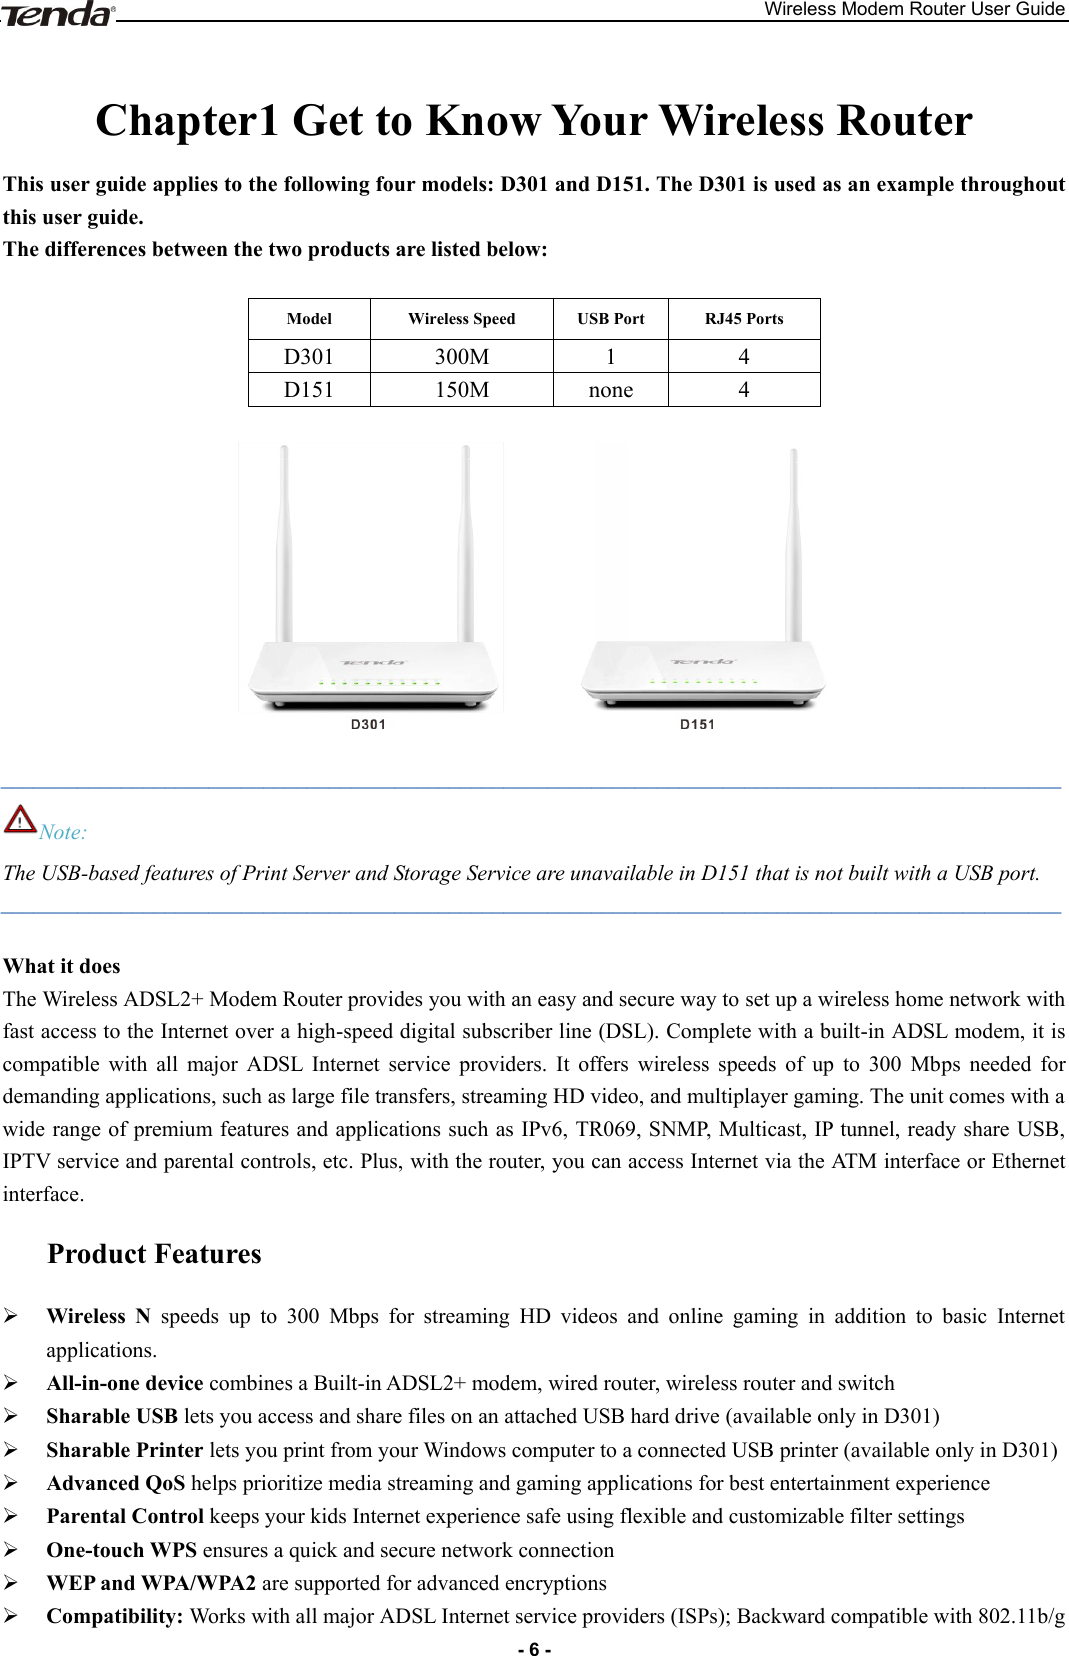 Wireless Modem Router User Guide - 6 -  Chapter1 Get to Know Your Wireless Router   This user guide applies to the following four models: D301 and D151. The D301 is used as an example throughout this user guide.   The differences between the two products are listed below:  Model Wireless Speed USB Port RJ45 Ports D301 300M 1 4 D151 150M none 4    _________________________________________________________________________________________________ Note: The USB-based features of Print Server and Storage Service are unavailable in D151 that is not built with a USB port. _________________________________________________________________________________________________  What it does The Wireless ADSL2+ Modem Router provides you with an easy and secure way to set up a wireless home network with fast access to the Internet over a high-speed digital subscriber line (DSL). Complete with a built-in ADSL modem, it is compatible  with  all  major  ADSL  Internet  service  providers.  It  offers  wireless  speeds  of  up  to  300  Mbps  needed  for demanding applications, such as large file transfers, streaming HD video, and multiplayer gaming. The unit comes with a wide range of premium features and applications such as IPv6, TR069, SNMP, Multicast, IP tunnel, ready share USB, IPTV service and parental controls, etc. Plus, with the router, you can access Internet via the ATM interface or Ethernet interface. Product Features  Wireless  N  speeds  up  to  300  Mbps  for  streaming  HD  videos  and  online  gaming  in  addition  to  basic  Internet applications.    All-in-one device combines a Built-in ADSL2+ modem, wired router, wireless router and switch  Sharable USB lets you access and share files on an attached USB hard drive (available only in D301)  Sharable Printer lets you print from your Windows computer to a connected USB printer (available only in D301)  Advanced QoS helps prioritize media streaming and gaming applications for best entertainment experience  Parental Control keeps your kids Internet experience safe using flexible and customizable filter settings  One-touch WPS ensures a quick and secure network connection    WEP and WPA/WPA2 are supported for advanced encryptions  Compatibility: Works with all major ADSL Internet service providers (ISPs); Backward compatible with 802.11b/g 